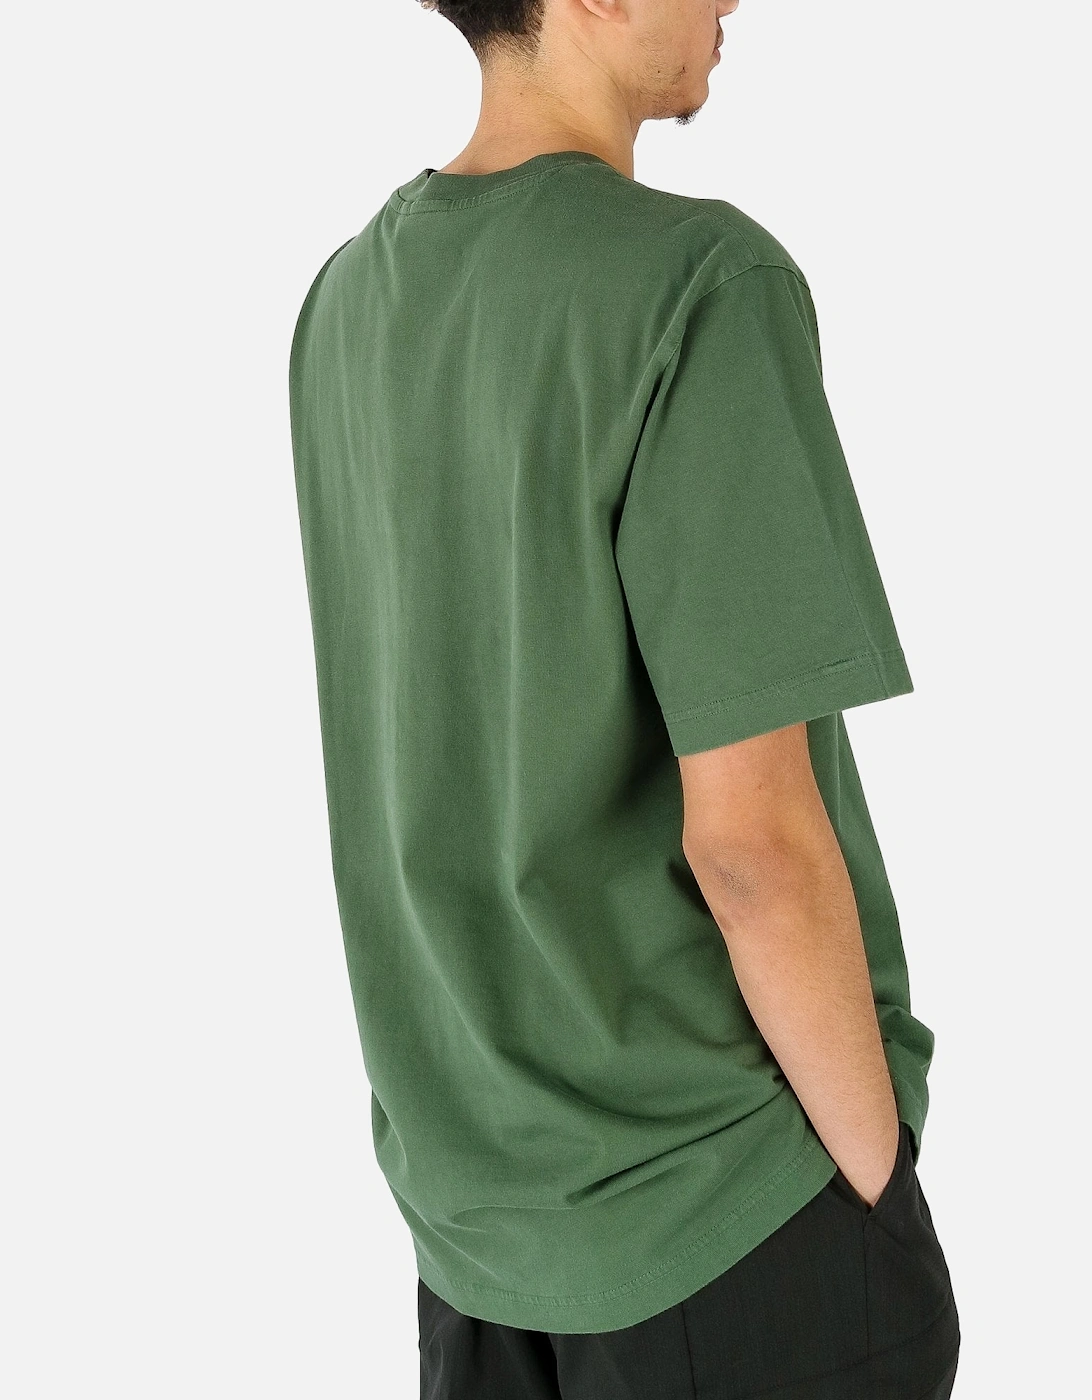 Outline Embroidered Logo Green Tee